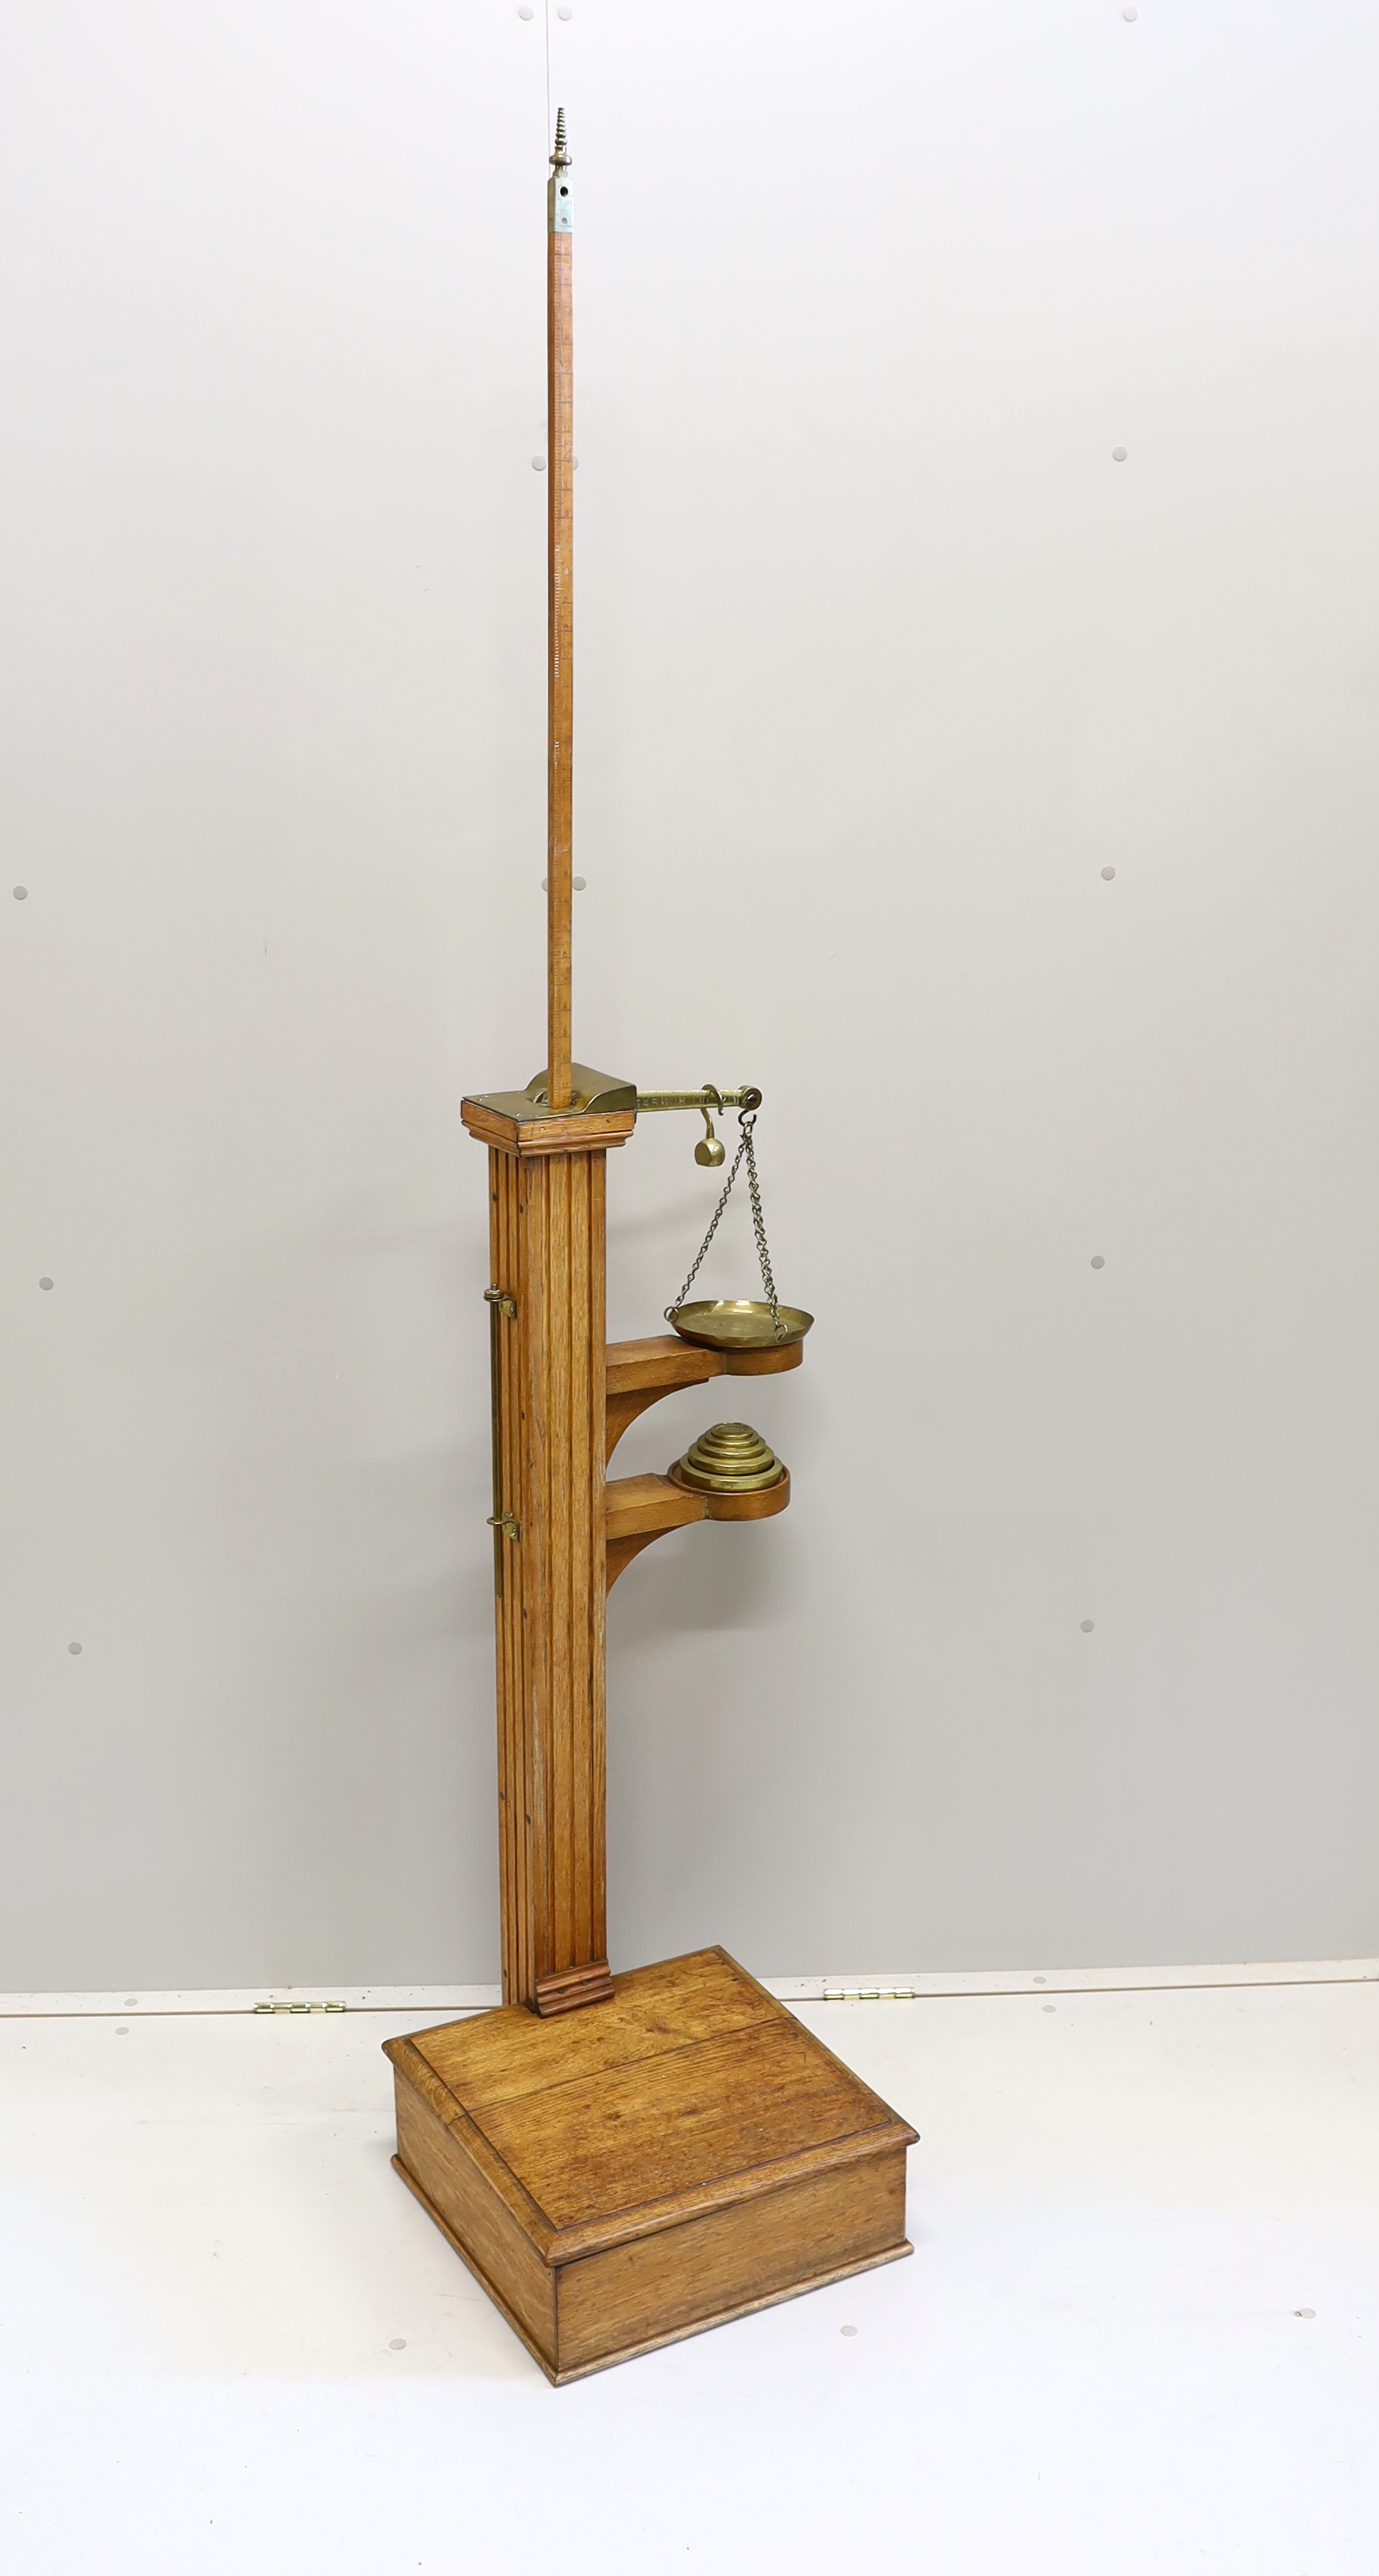 A Youngs of Bear St. London Victorian brass mounted oak personal weighing scales with incorporated height measuring stick, oak body and platform and set of five weights, 122cm